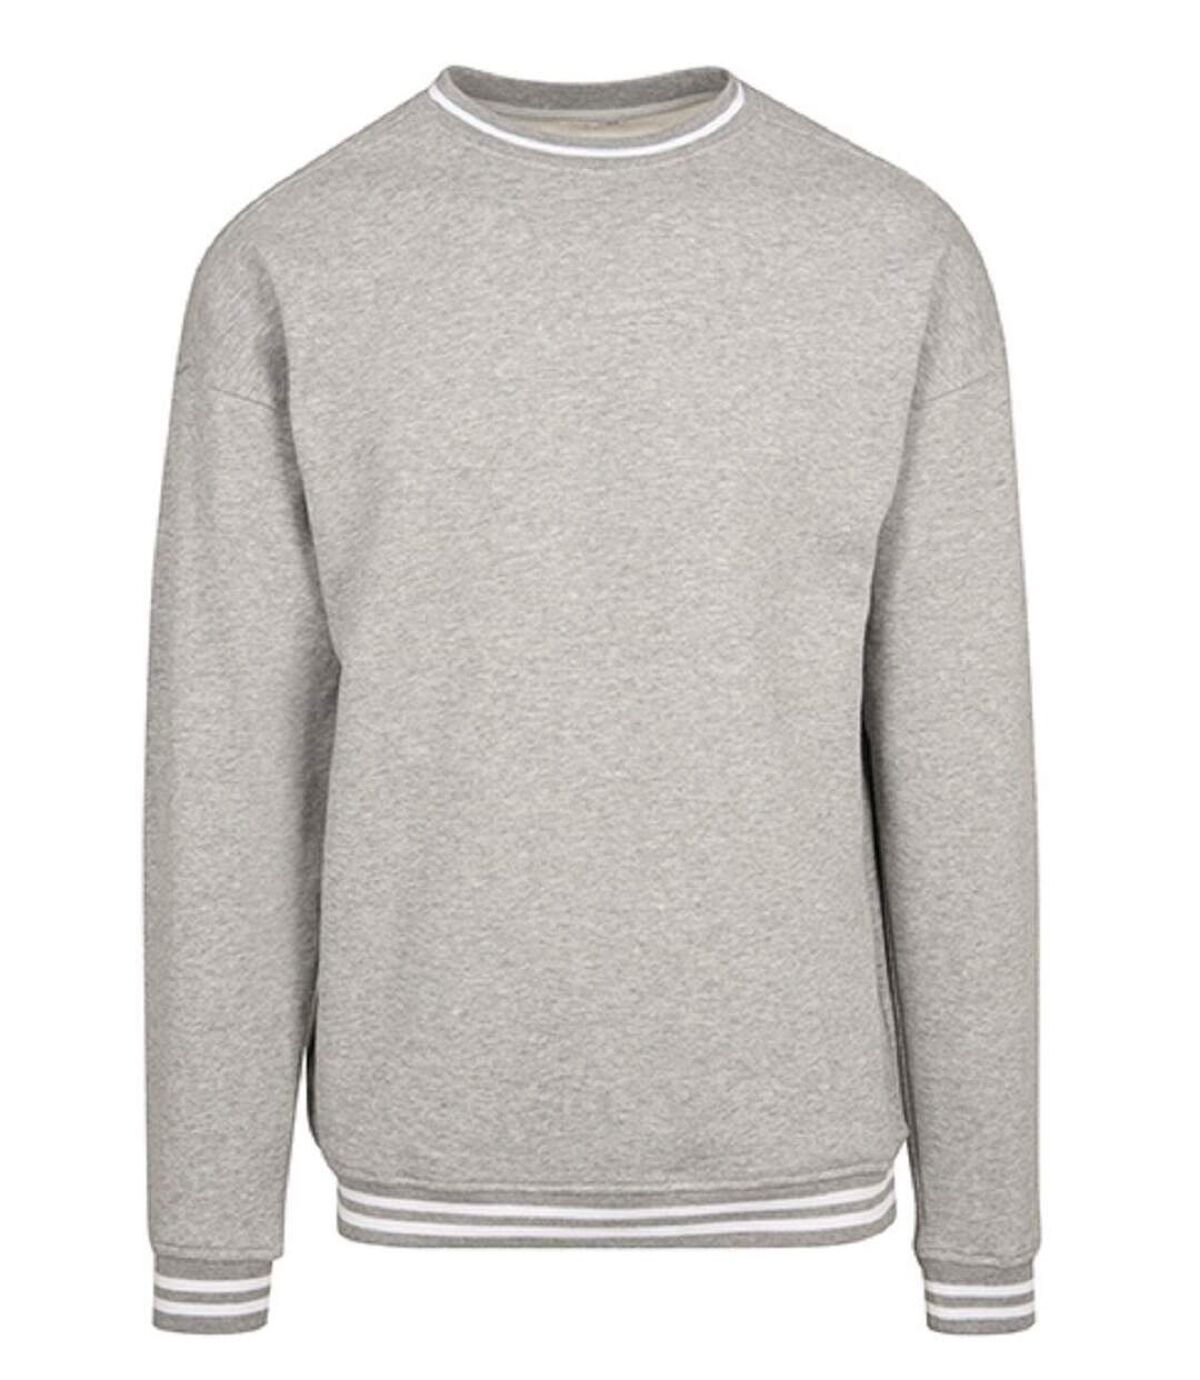 Sweat shirt - Homme - BY104 - gris chiné